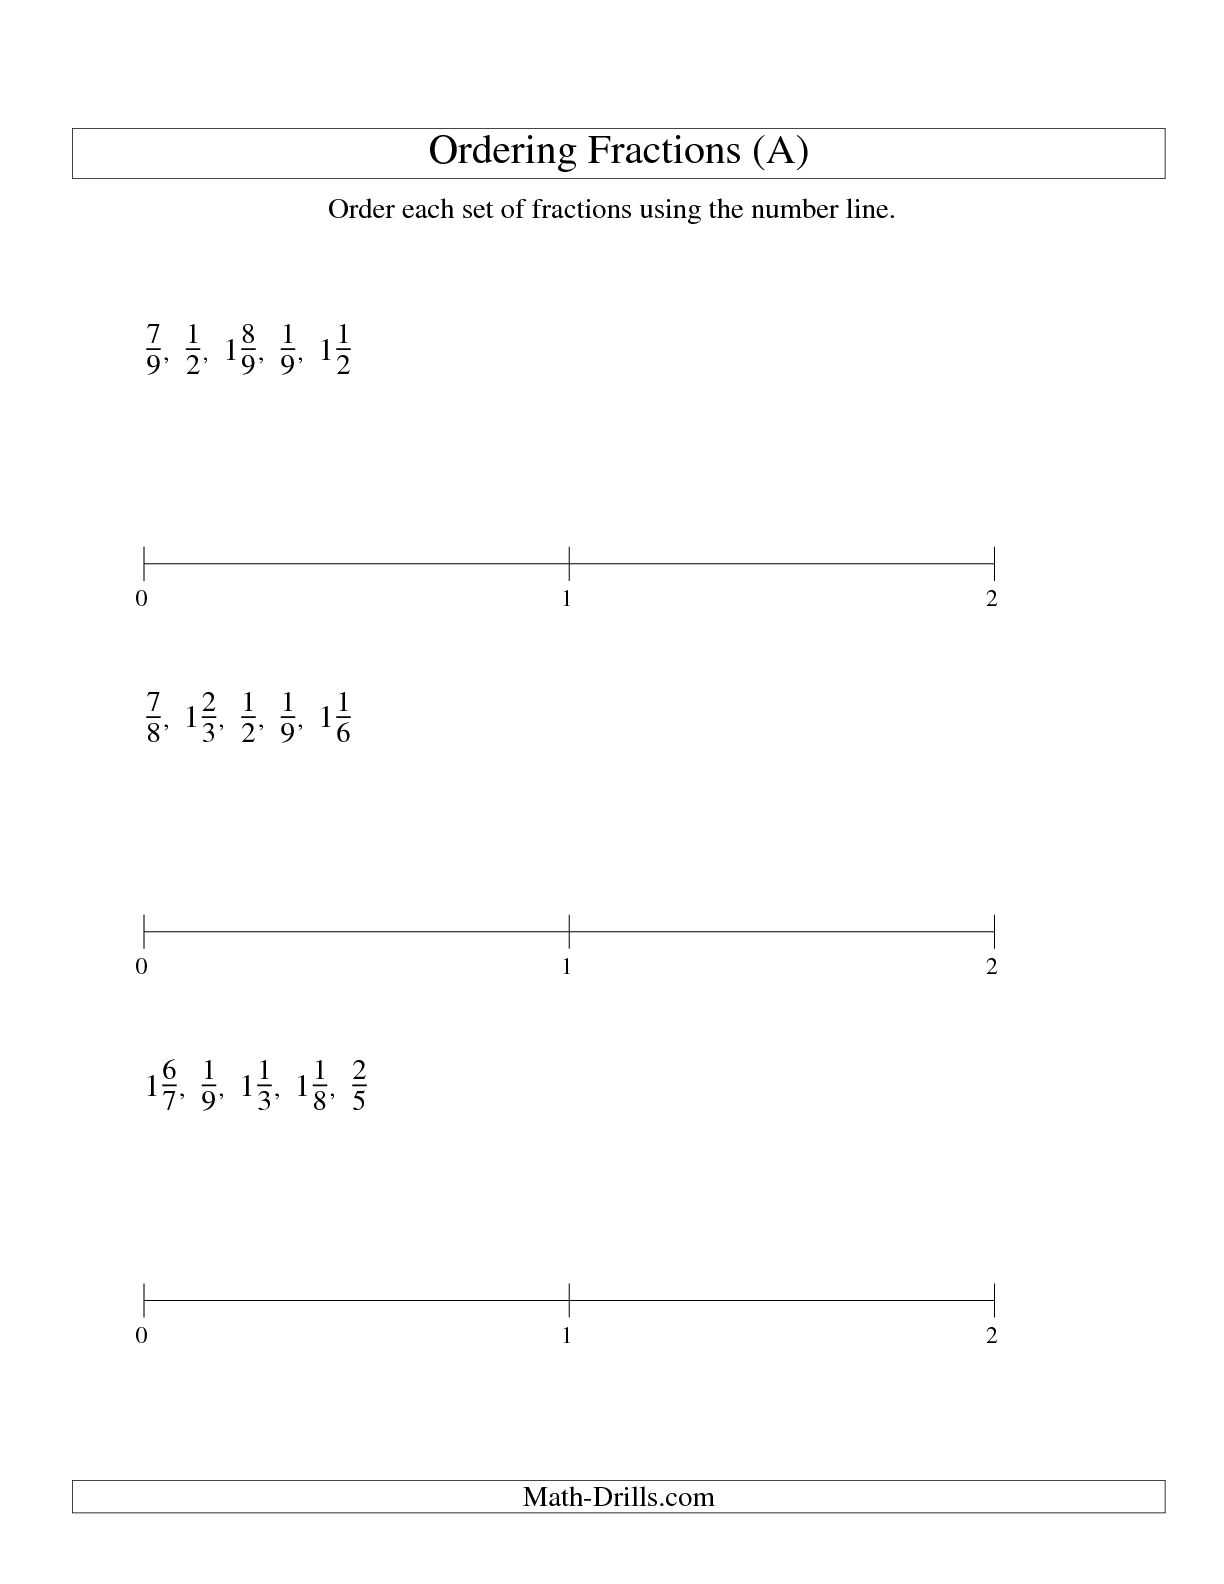 Fractions On A Number Line 3rd Grade Worksheets with ordering Fractions On A Number Line All Denominators to 10 Paring